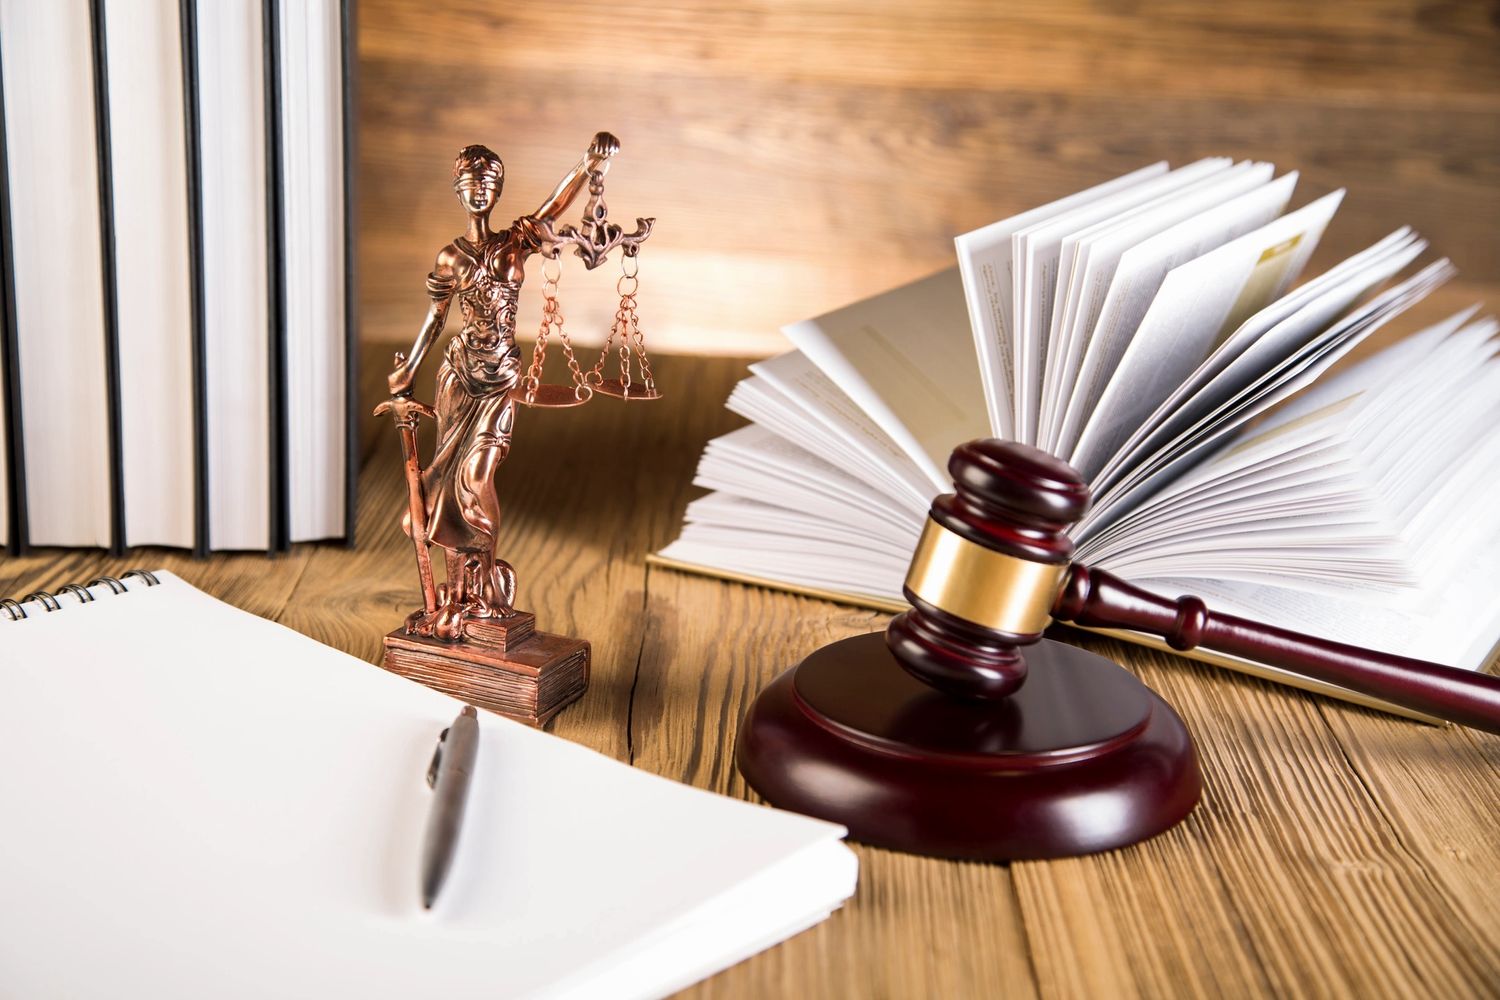 A picture of a small statue of Lady Justice, with her scales, a gavel, and an assortment of law book